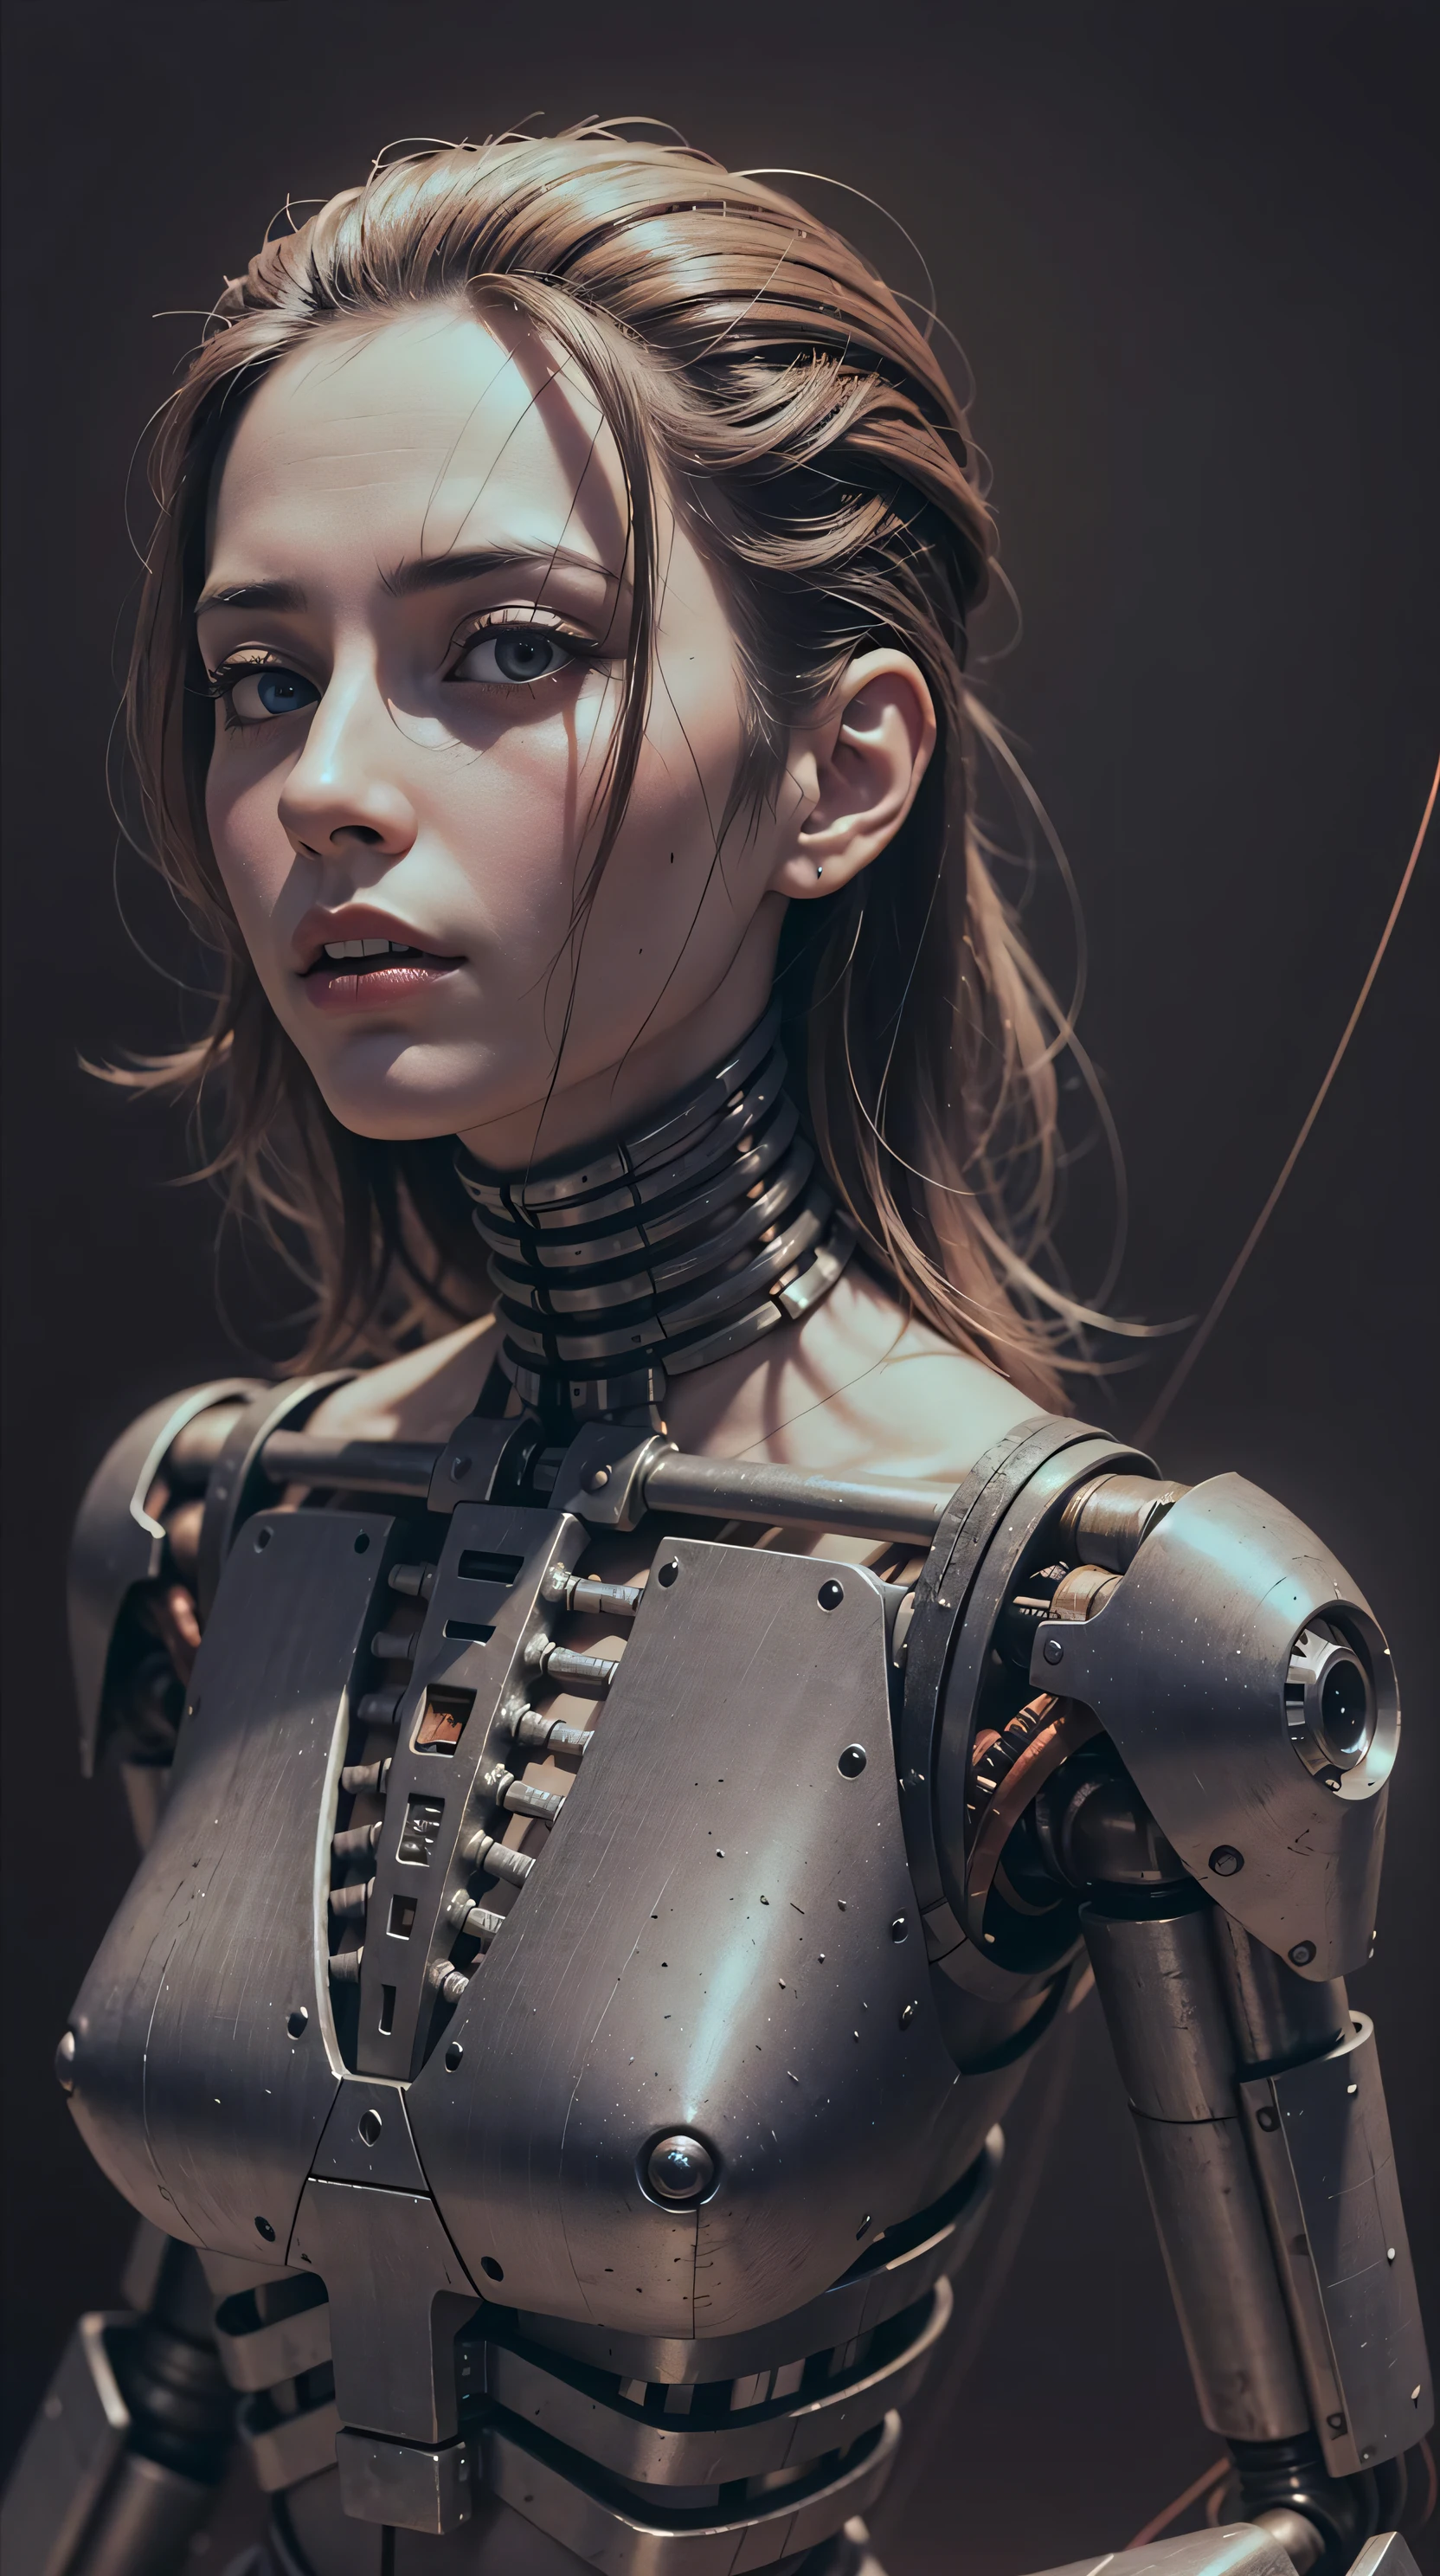 Ray tracing, (masterpiece,best quality:1.3), (ultra-detailed:1.3), (photo-realistic:1), (an extremely delicate and beautiful), cinematic light,(1mechanical girl), (hair made of copper wires), solo, full body, (machine made joints), (((mechanical lower jaw only))), mechanical limbs, blood vessels connected to tubes, mechanical vertebra attaching to back,(mechanical cervical attaching to neck), (((red glowing eyes))), bio-mechanical, hr giger style,  zdzislaw beksinski skyle, metallic skeletal bones, exoskeleton, sitting,expressionless, (assembling body parts),(wires and cables attaching to neck and body), (wires and cables attaching to spine and, (intricate details:1) character focus, science fiction, RAW photo, cinematic masterpiece, (majestic epic composition), (movie scene), full shot, epic dynamic frame, dynamic pose, motion blur, sci-fi, cyber, (((cinematic look))), rim light, film grain, natural skin texture, 24mm, 4k textures, (highly detailed worn metal texture:1.3),